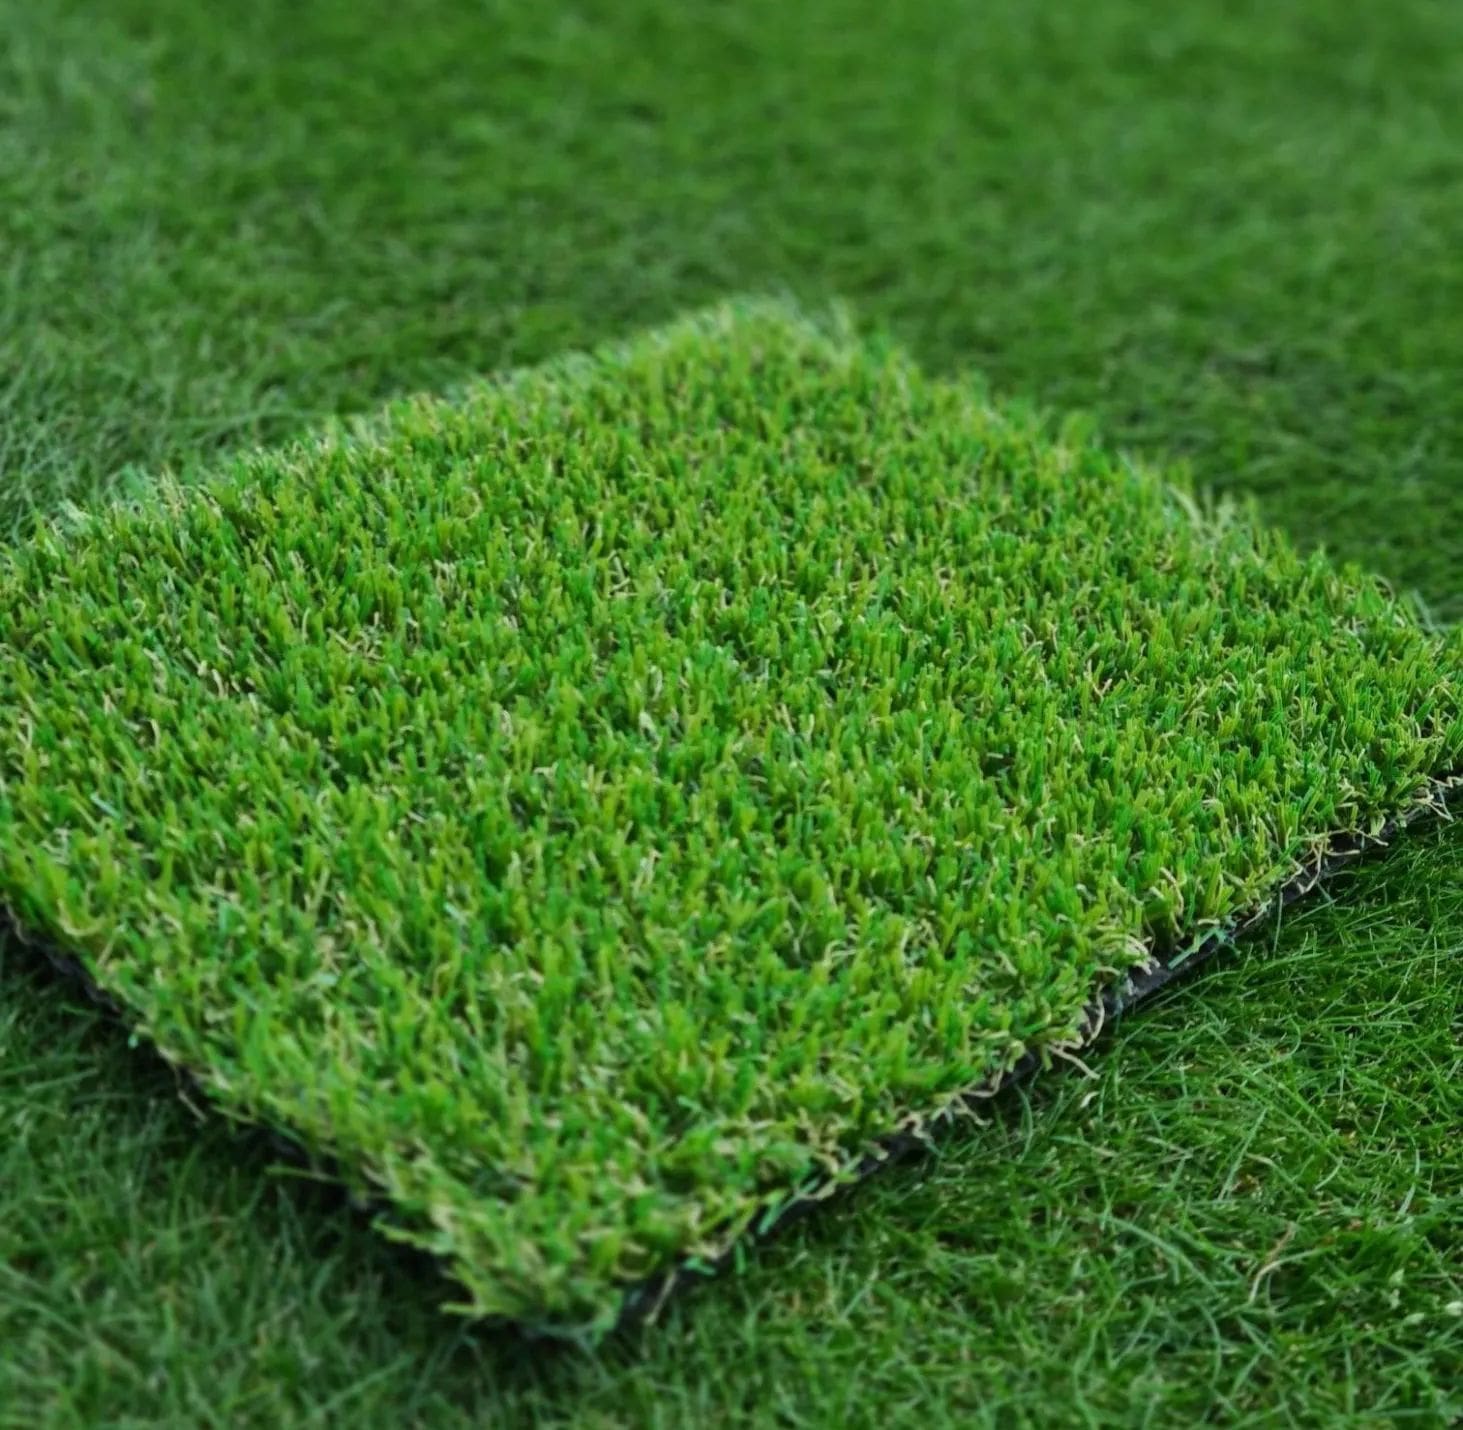 Ascot artificial grass collection - fake grass - astro turf - Readylawn nz